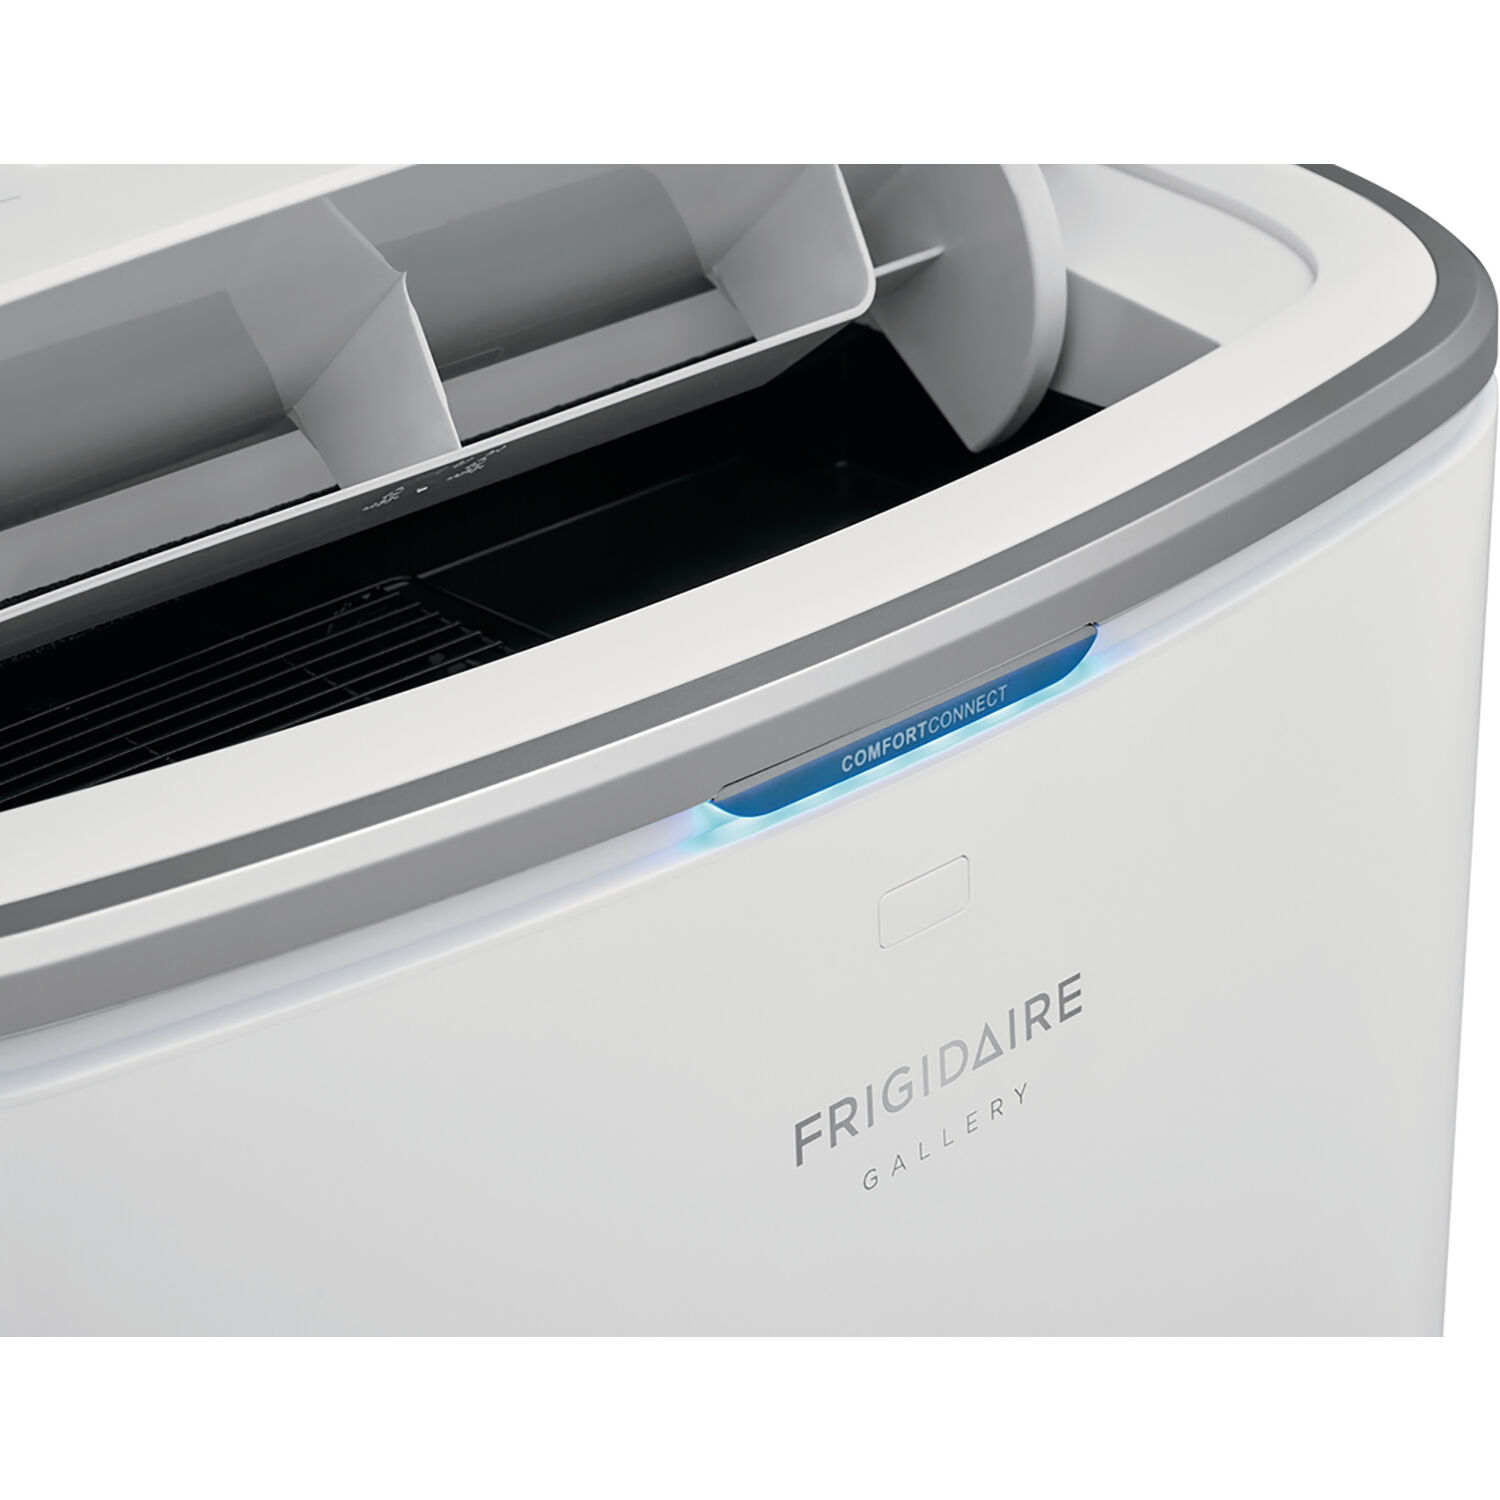 Frigidaire Cool Connect Smart Portable Air Conditioner with Wi-Fi Control for a Room up to 600-Sq. Ft. - image 14 of 14